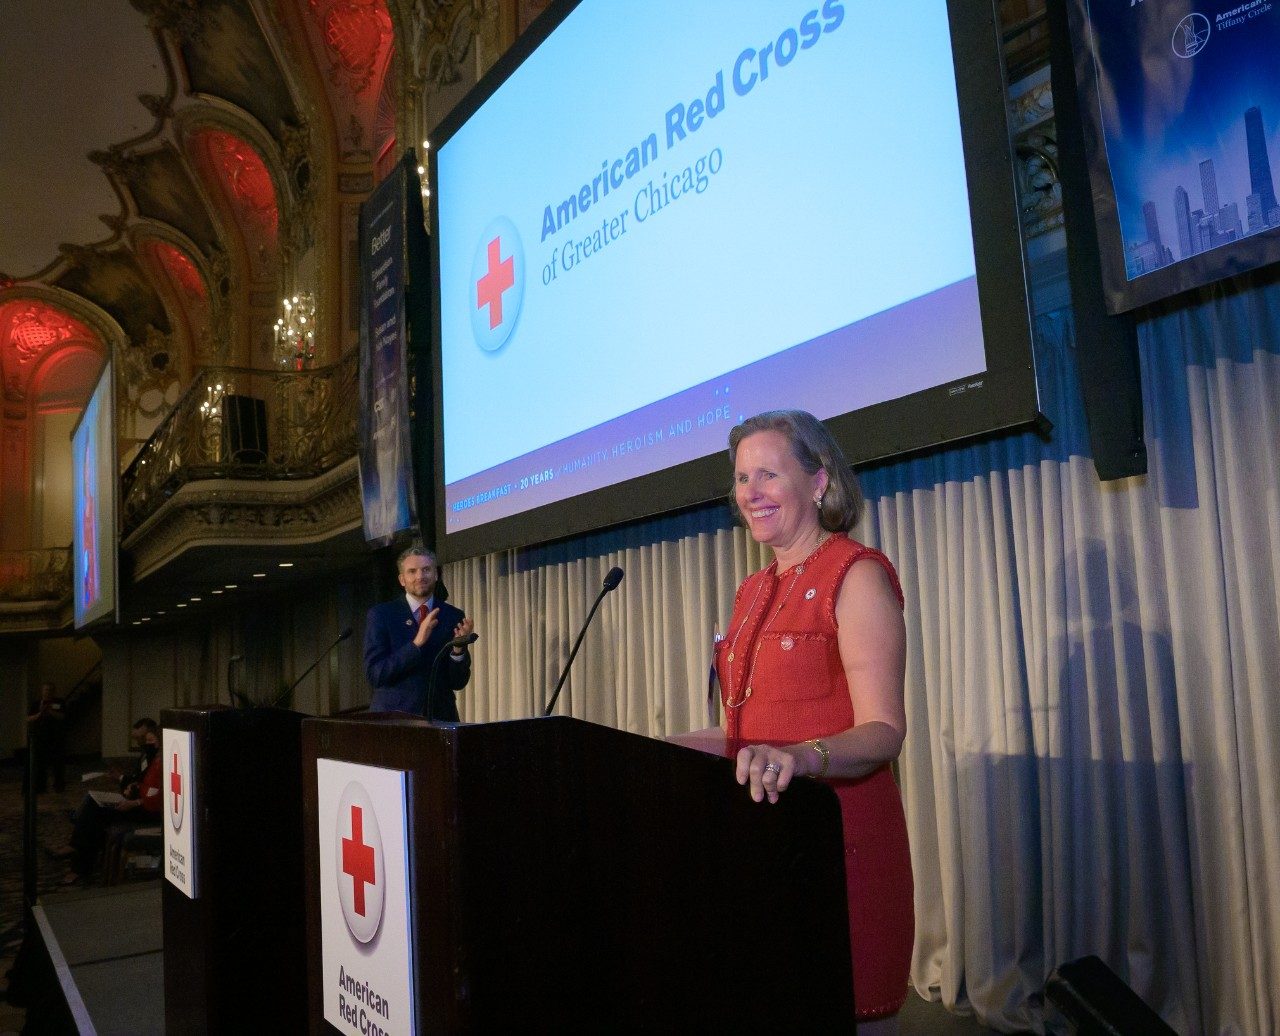 Susan Noyes speaking at an American Red Cross event